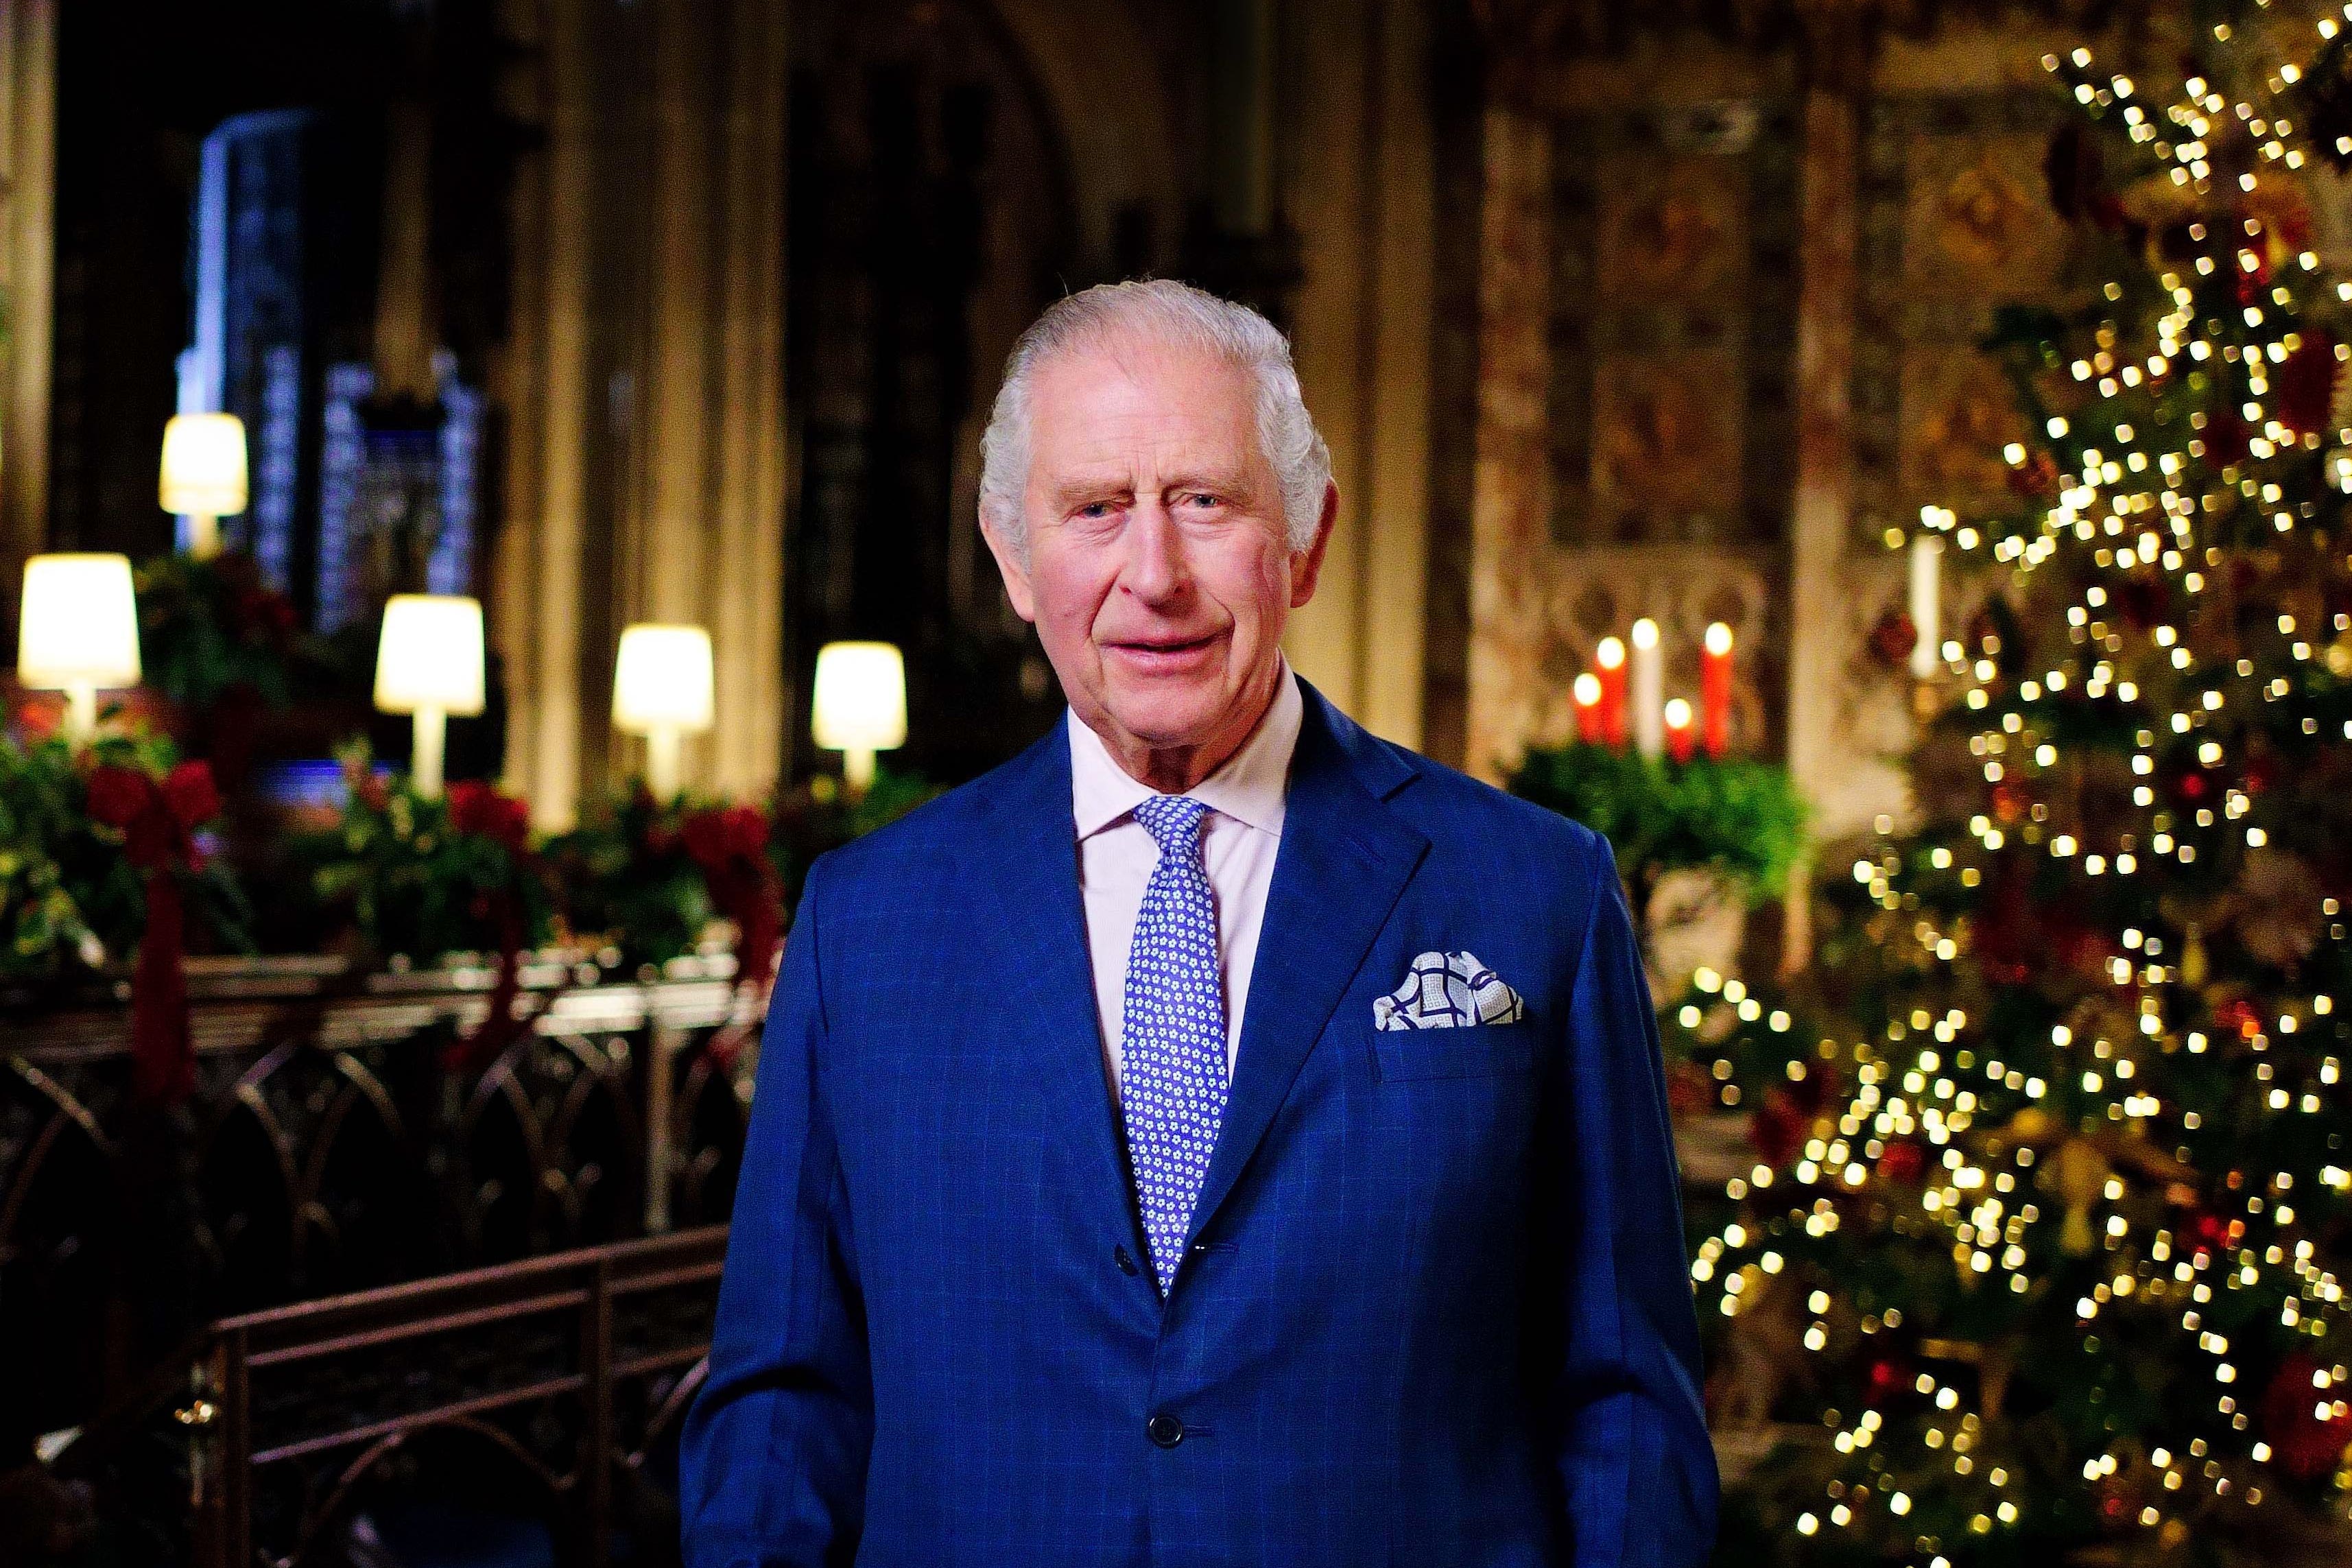 King Charles III records his first Christmas broadcast in the Quire of St George’s Chapel in Windsor Castle, Berkshire, last year